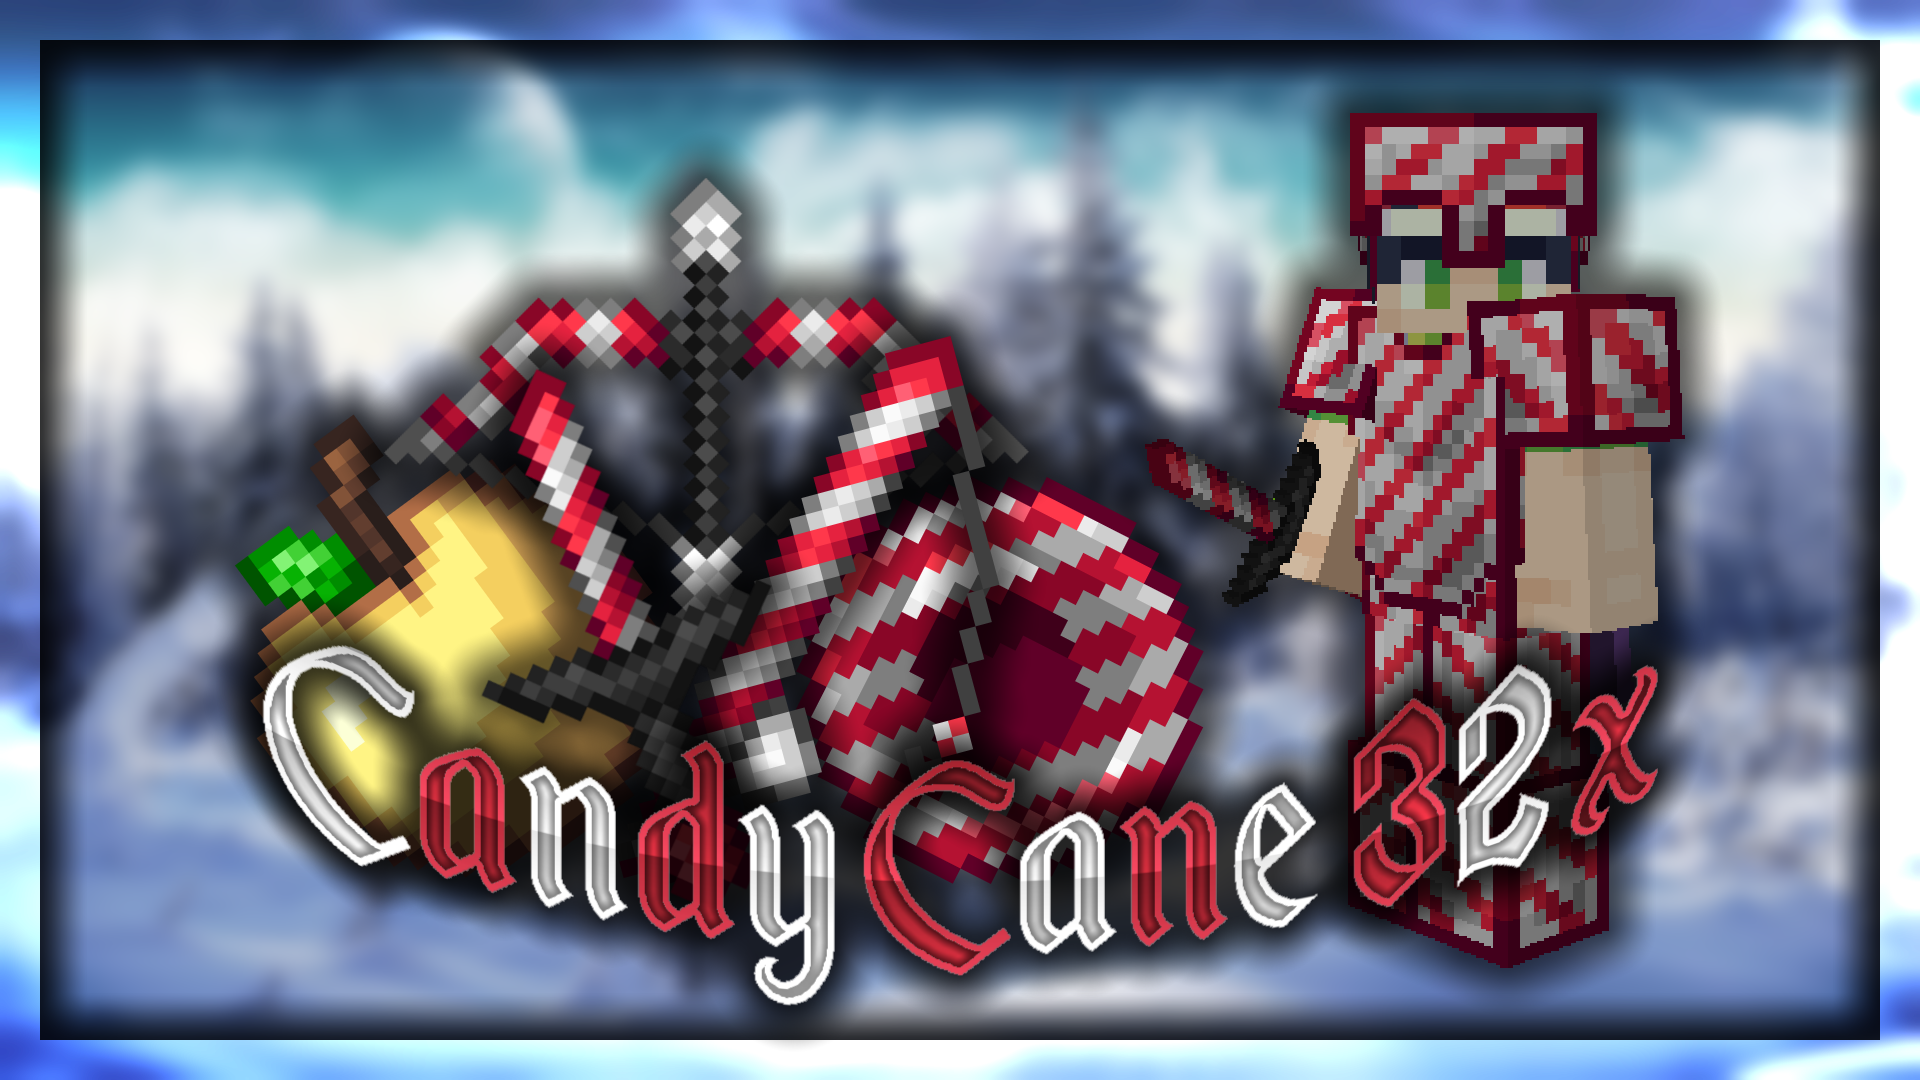 Candy Cane 32 by Mek on PvPRP